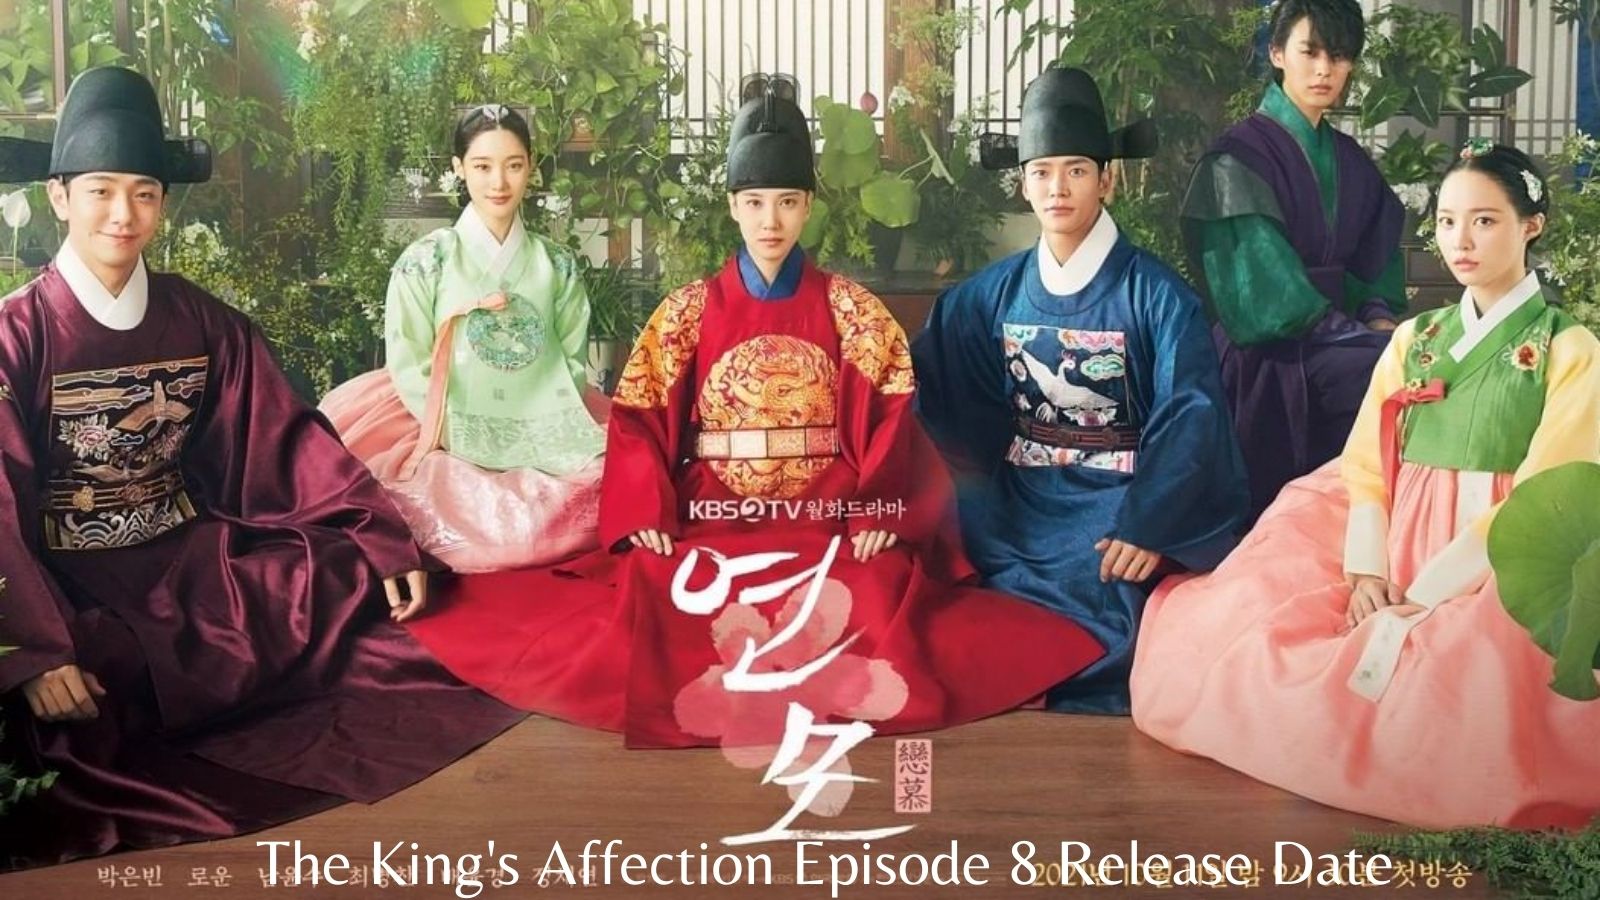 The King’s Affection Episode 8